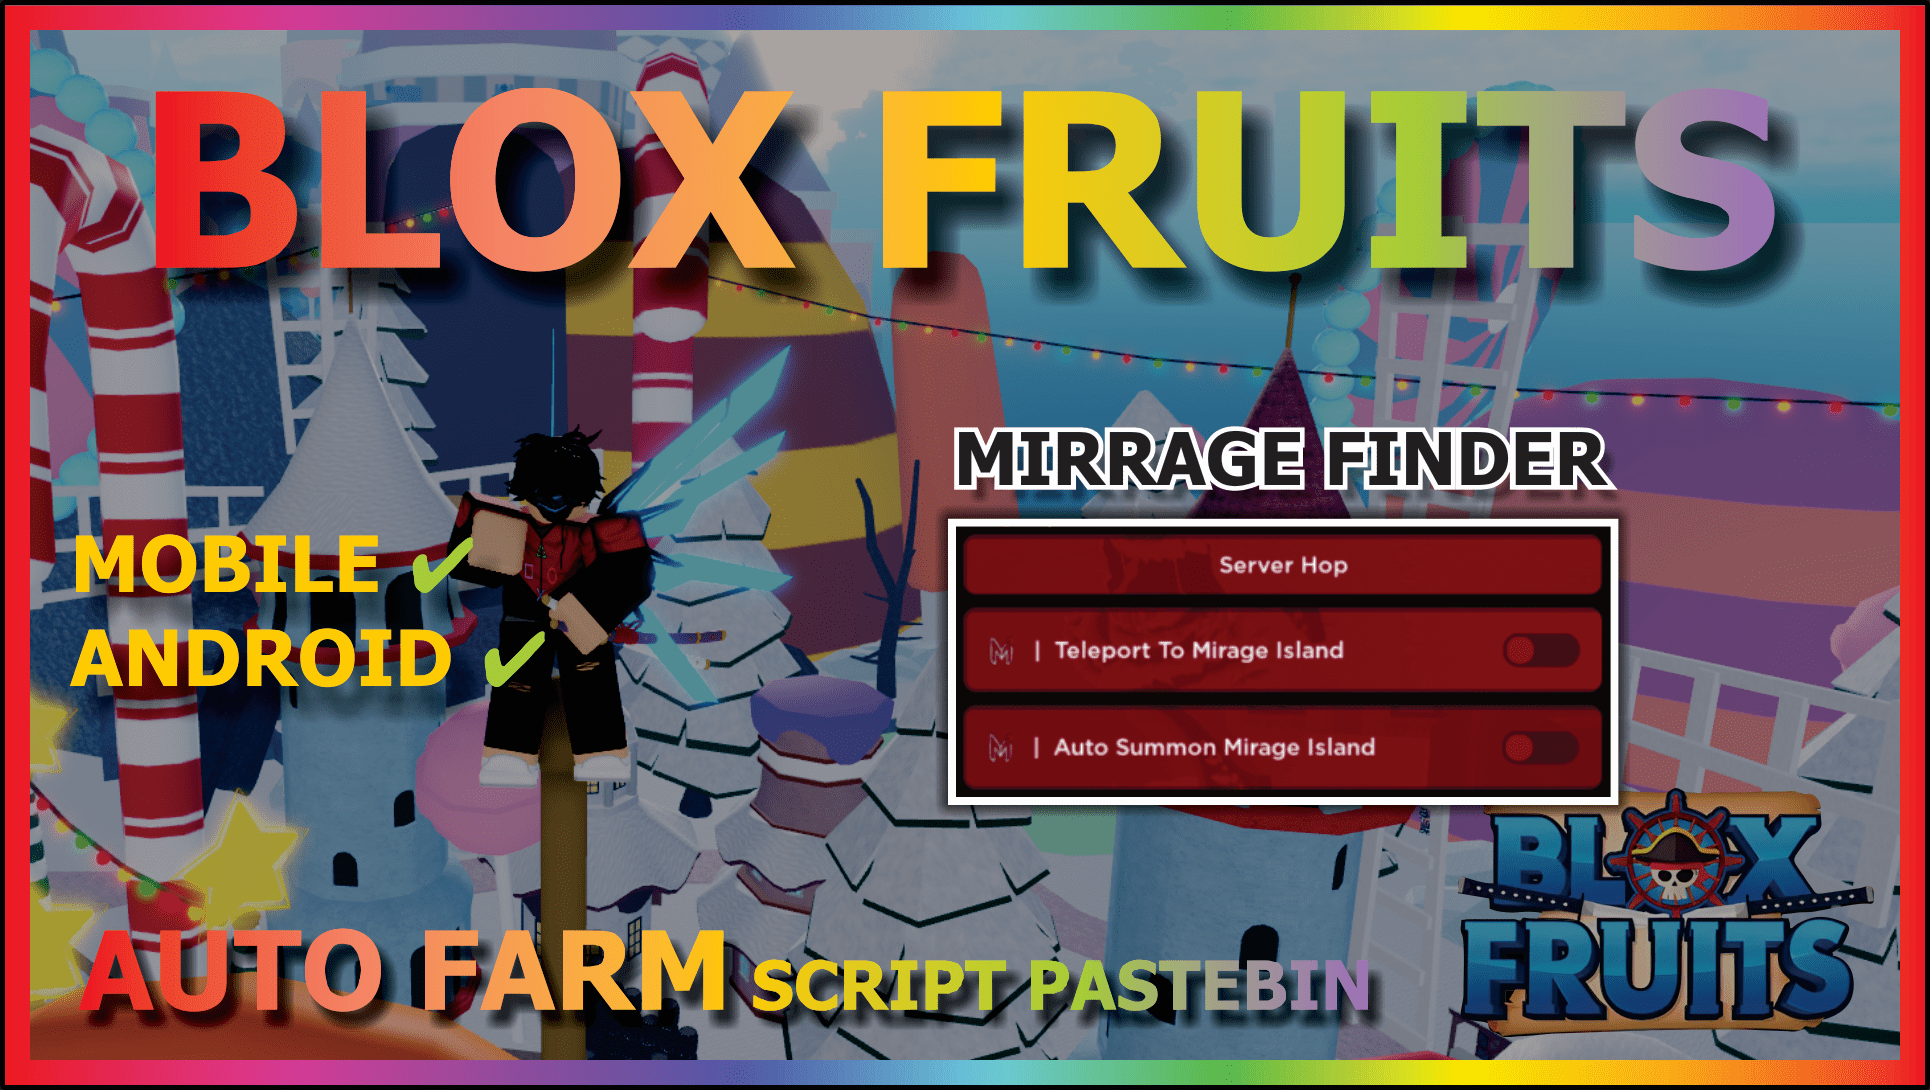 You are currently viewing BLOX FRUITS (MIRAGE FINDER)